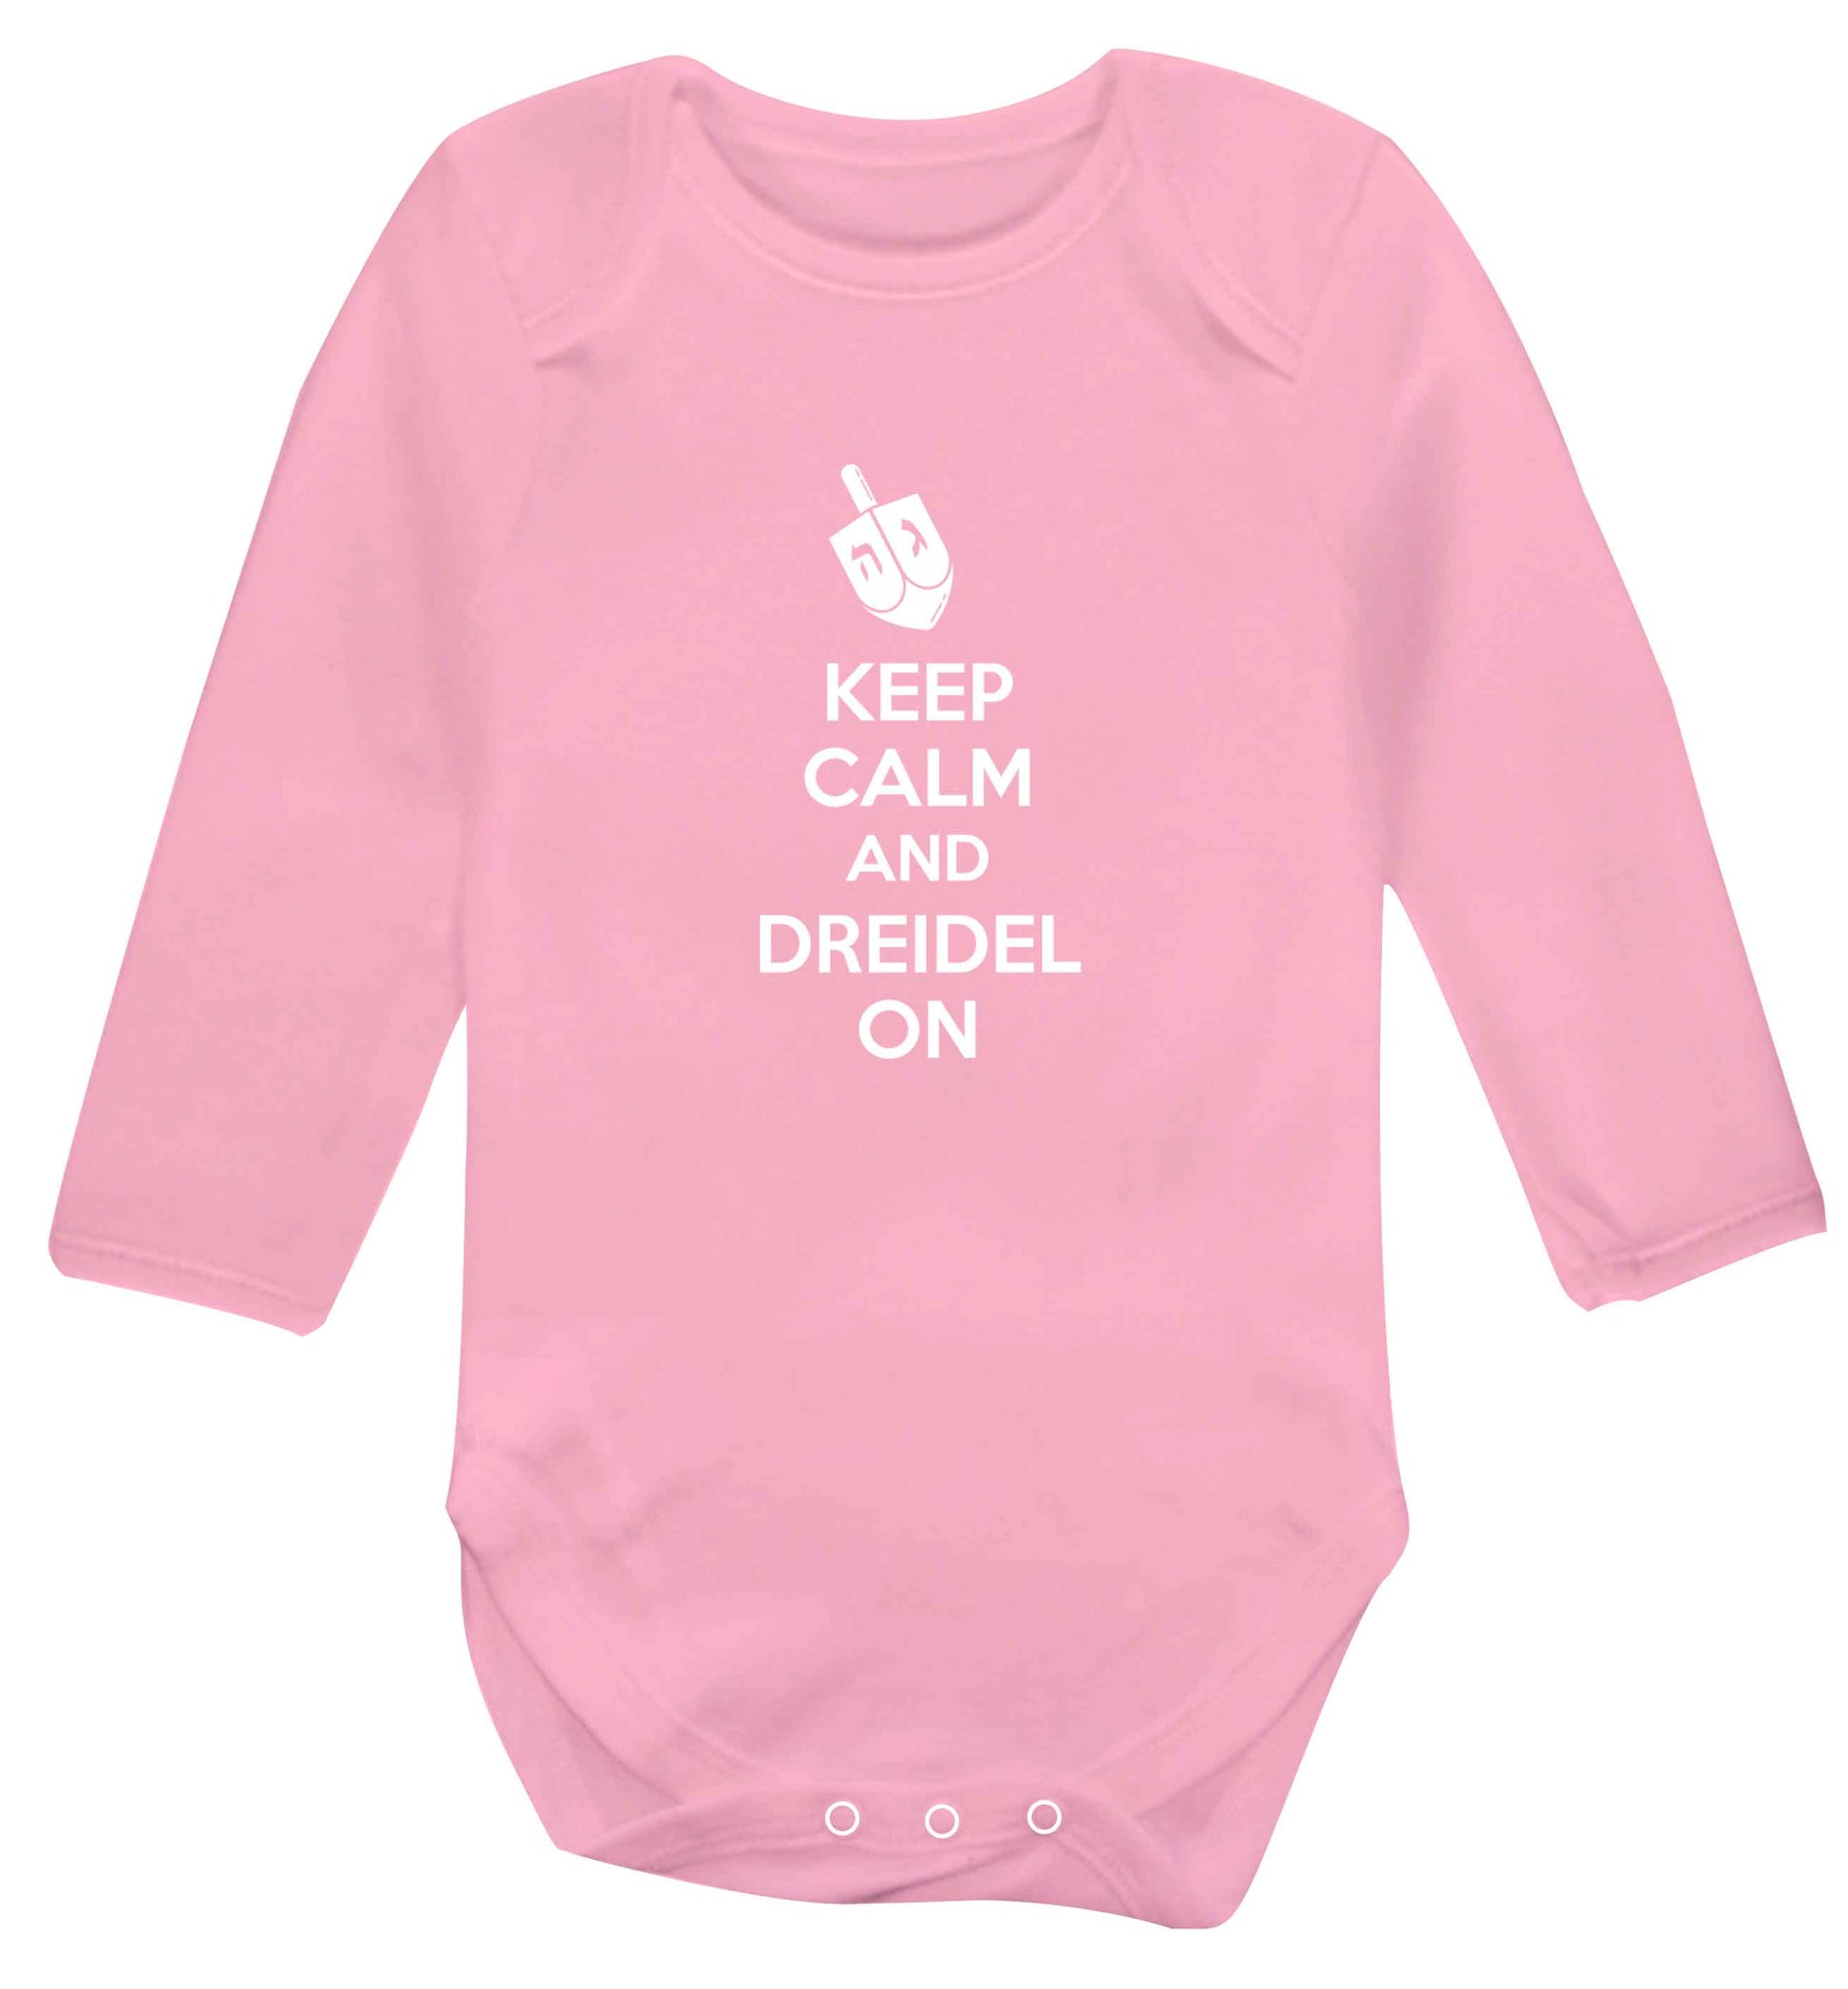 Keep calm and dreidel on baby vest long sleeved pale pink 6-12 months